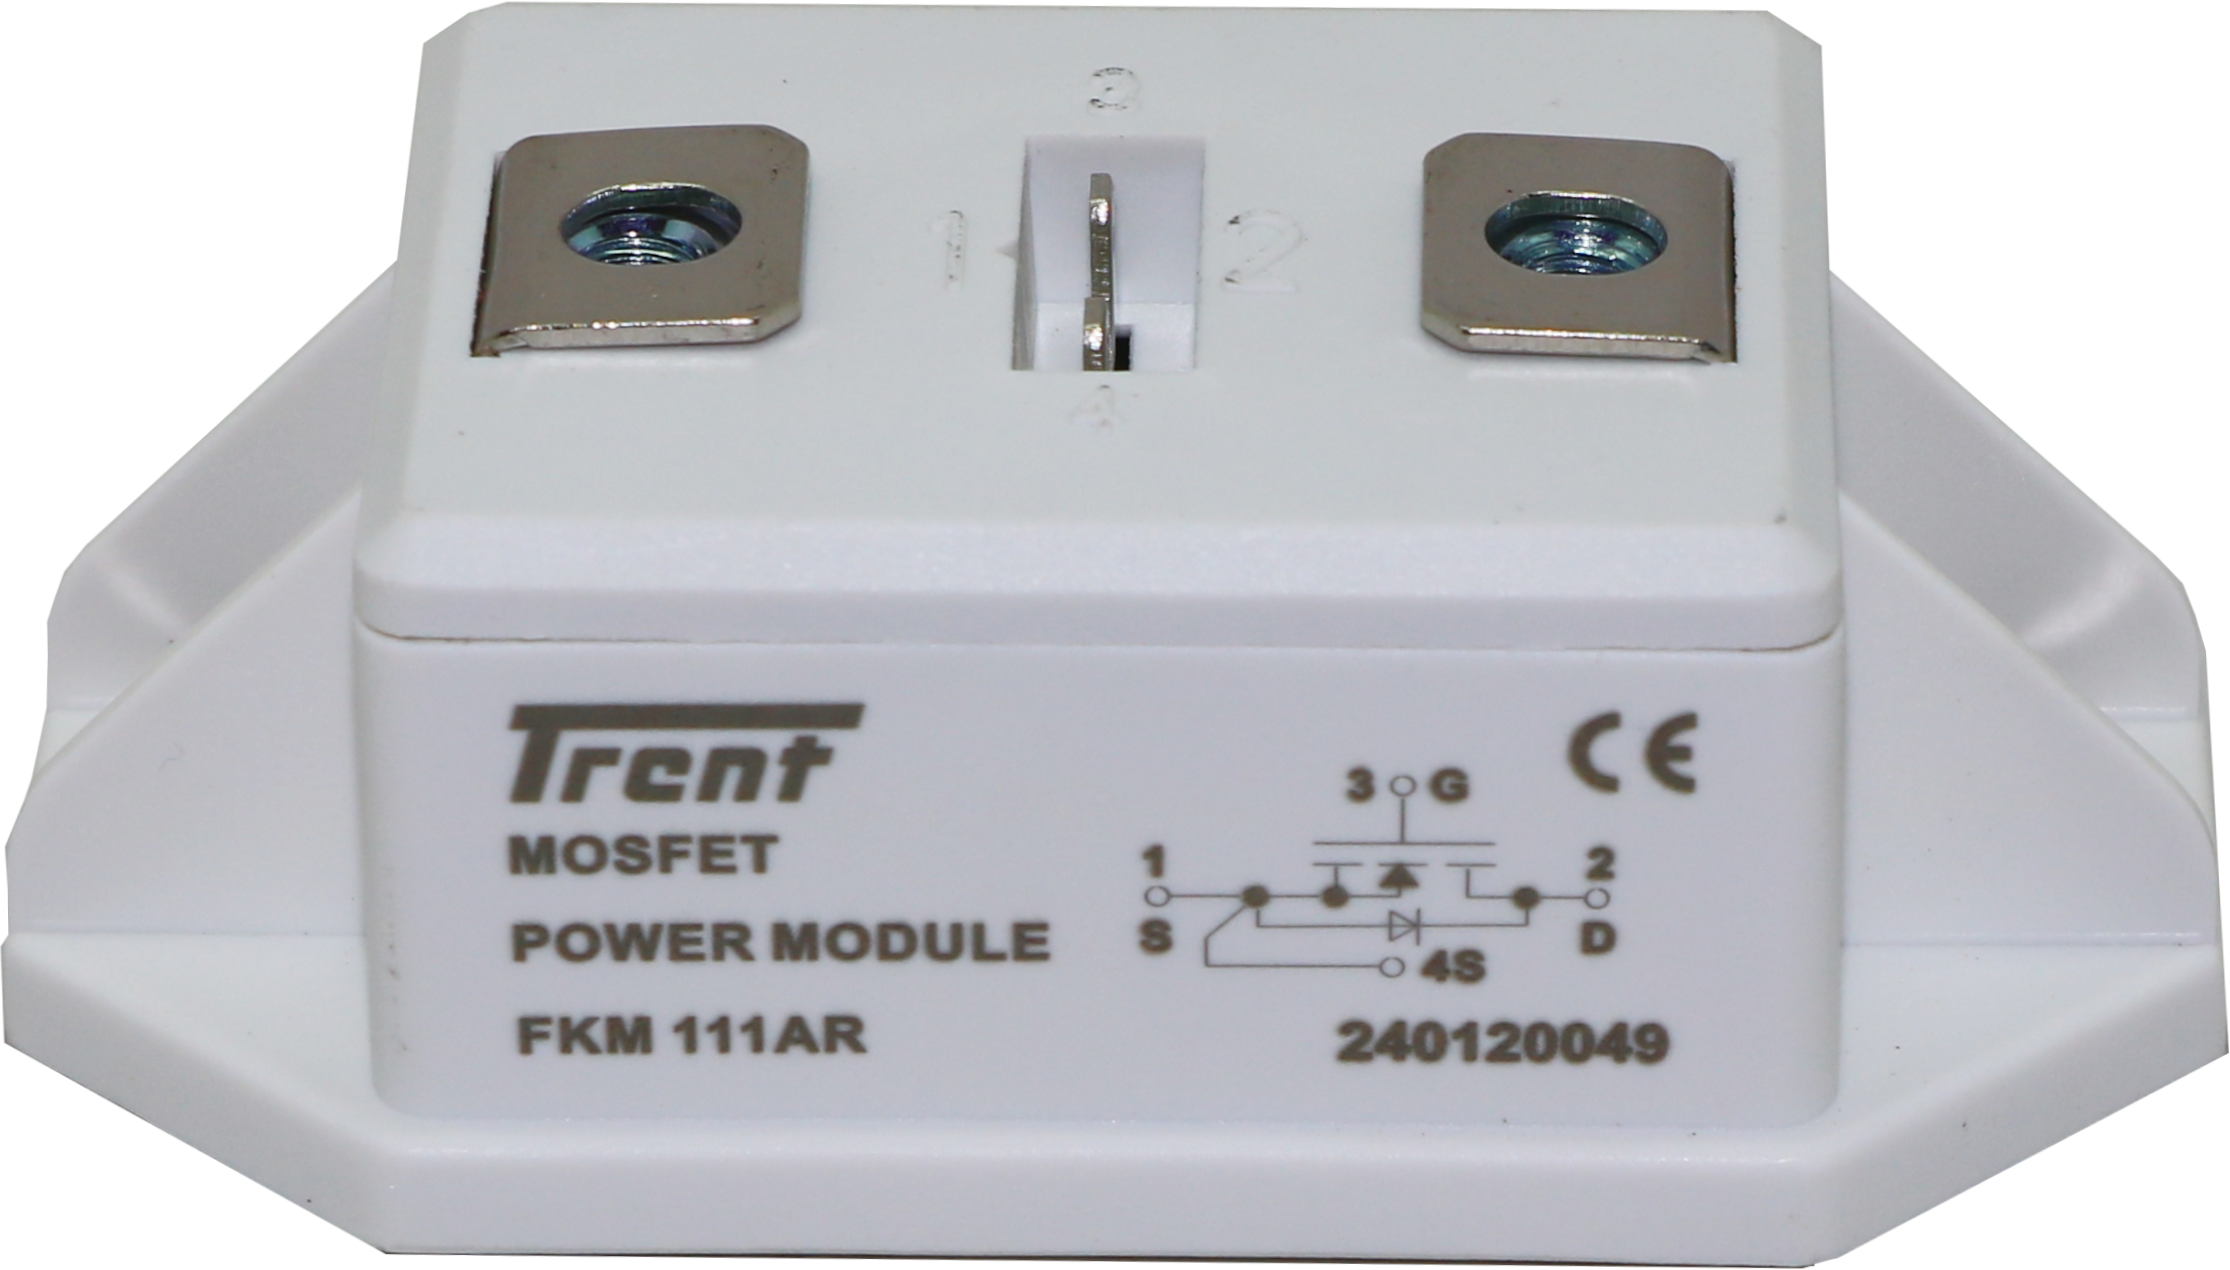 FKM111AR, Mosfet Single, 150 Amp, 100V, Medium Fast, OEM Drop in Replacement for SKM111AR, Can Be used to detect Earth Faults